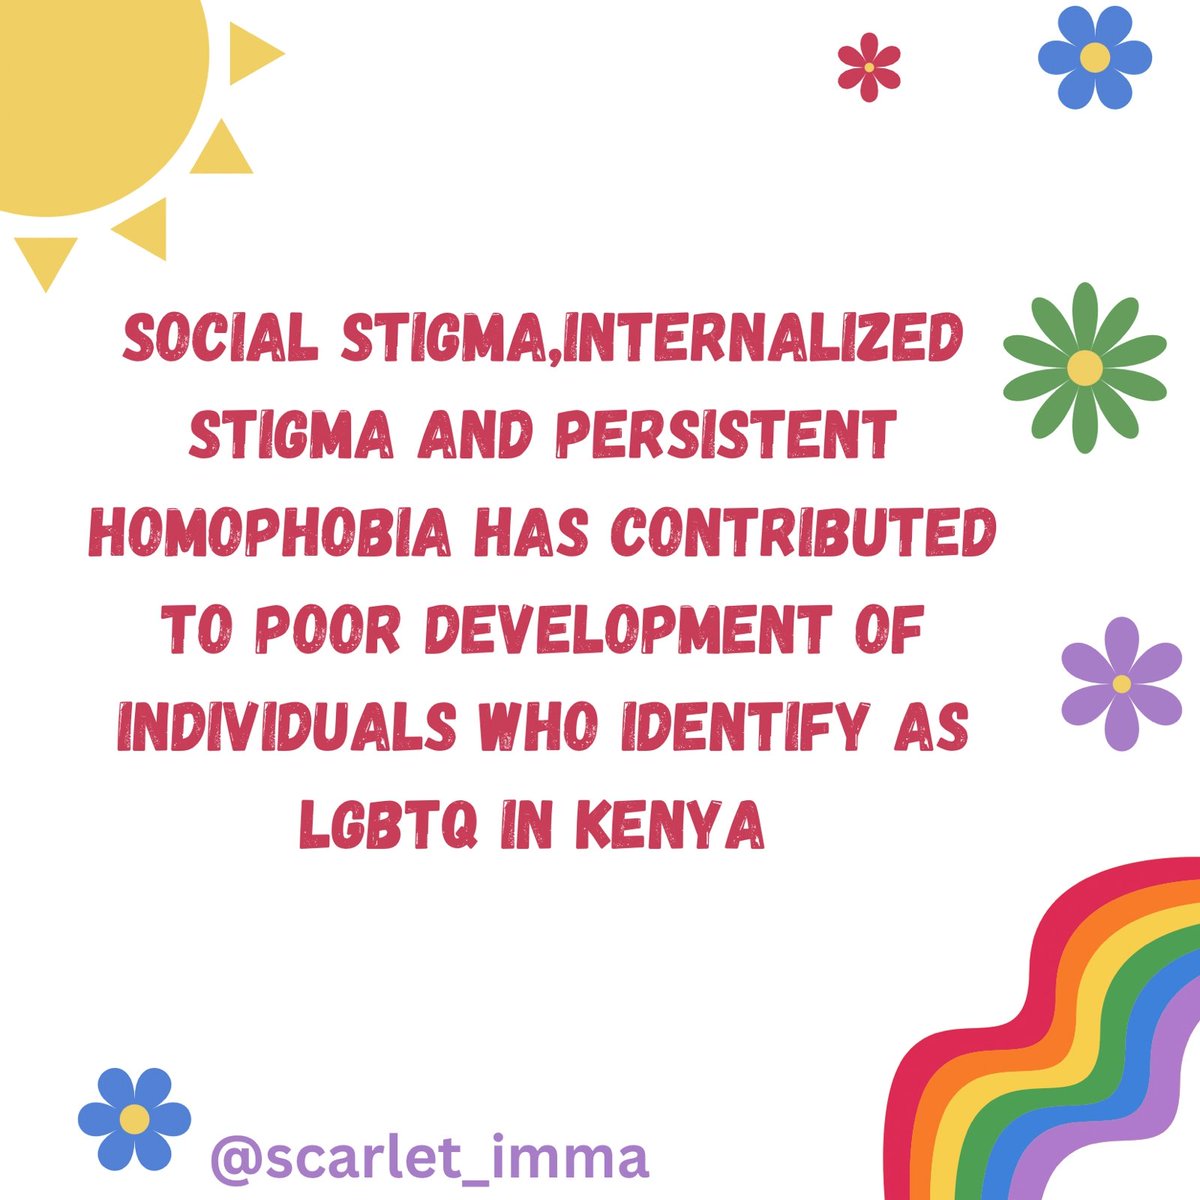 Many families still remain ignorant on issues of diverse sexuality and gender identity contributing to social stigma.
#BreakTheCycleOfViolence
#ProtectQueerKenyans #BreakTheCycleOfViolence
#JusticeForEdwinChiloba
#JusticeforSheila
#JusticeForJoashMosoti
#JusticeForEricaChandra